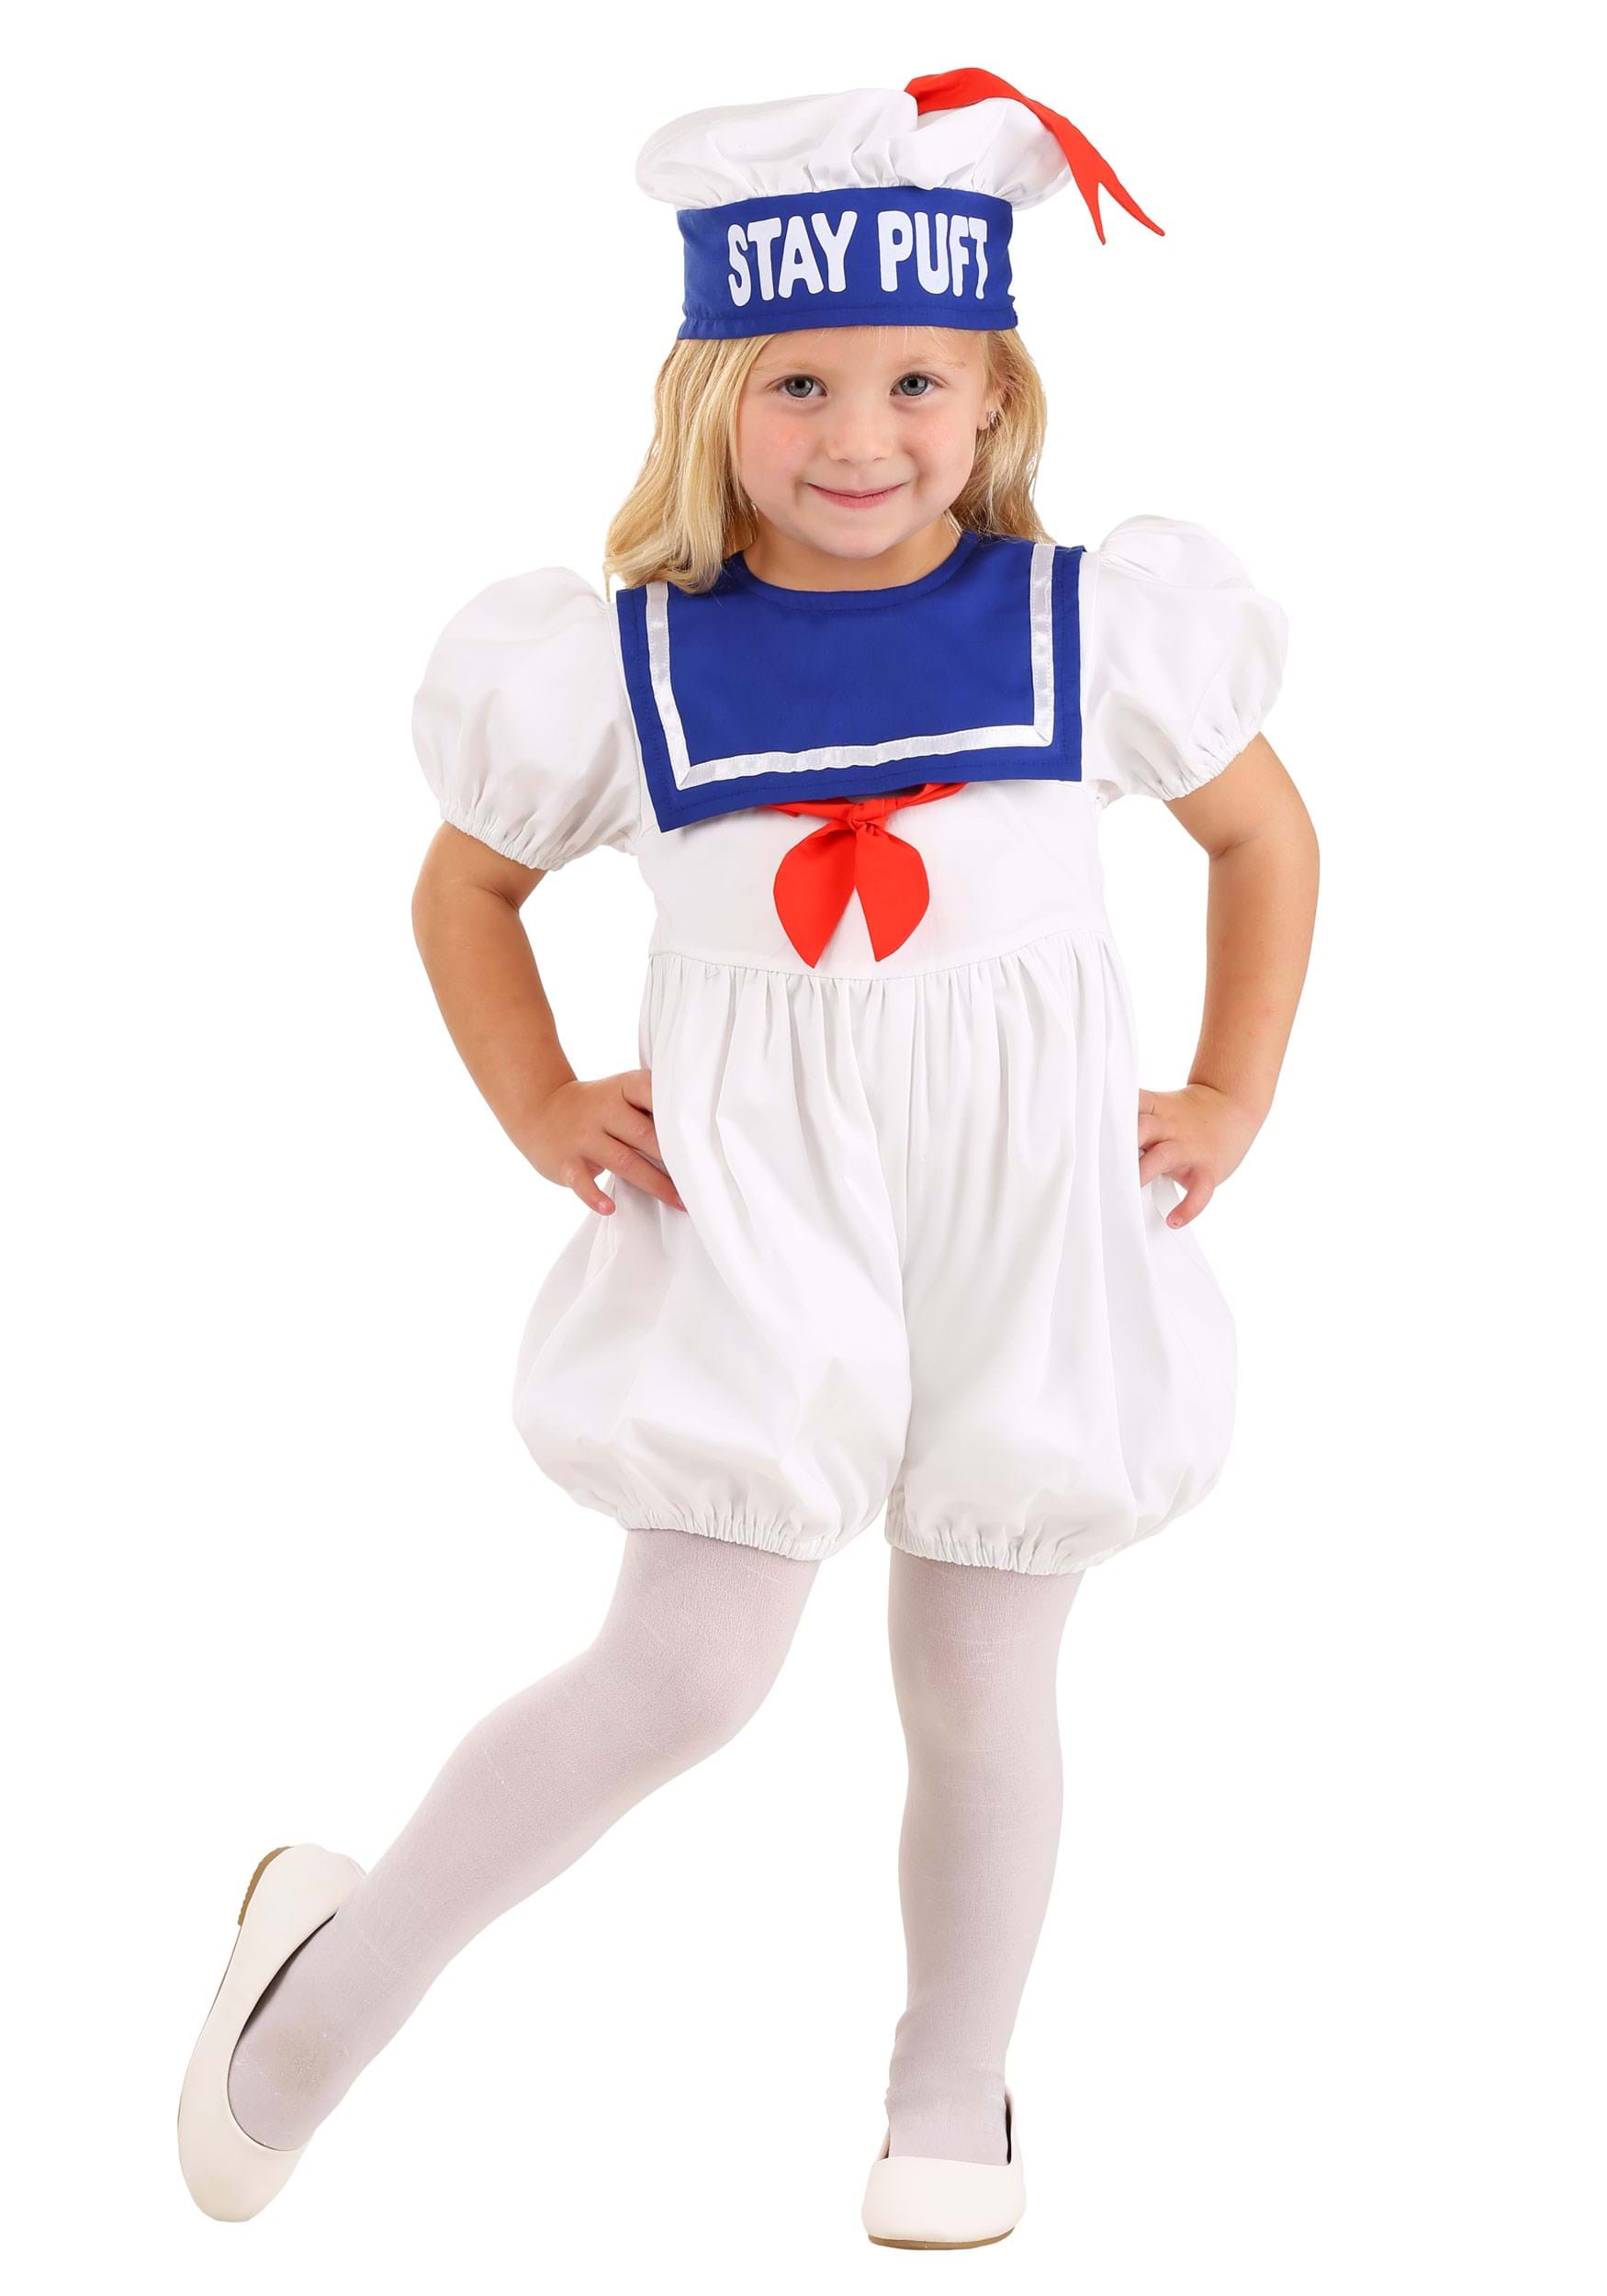 Photos - Fancy Dress Toddler FUN Costumes Ghostbusters Stay Puft  Bubble Costume Blue/Red 